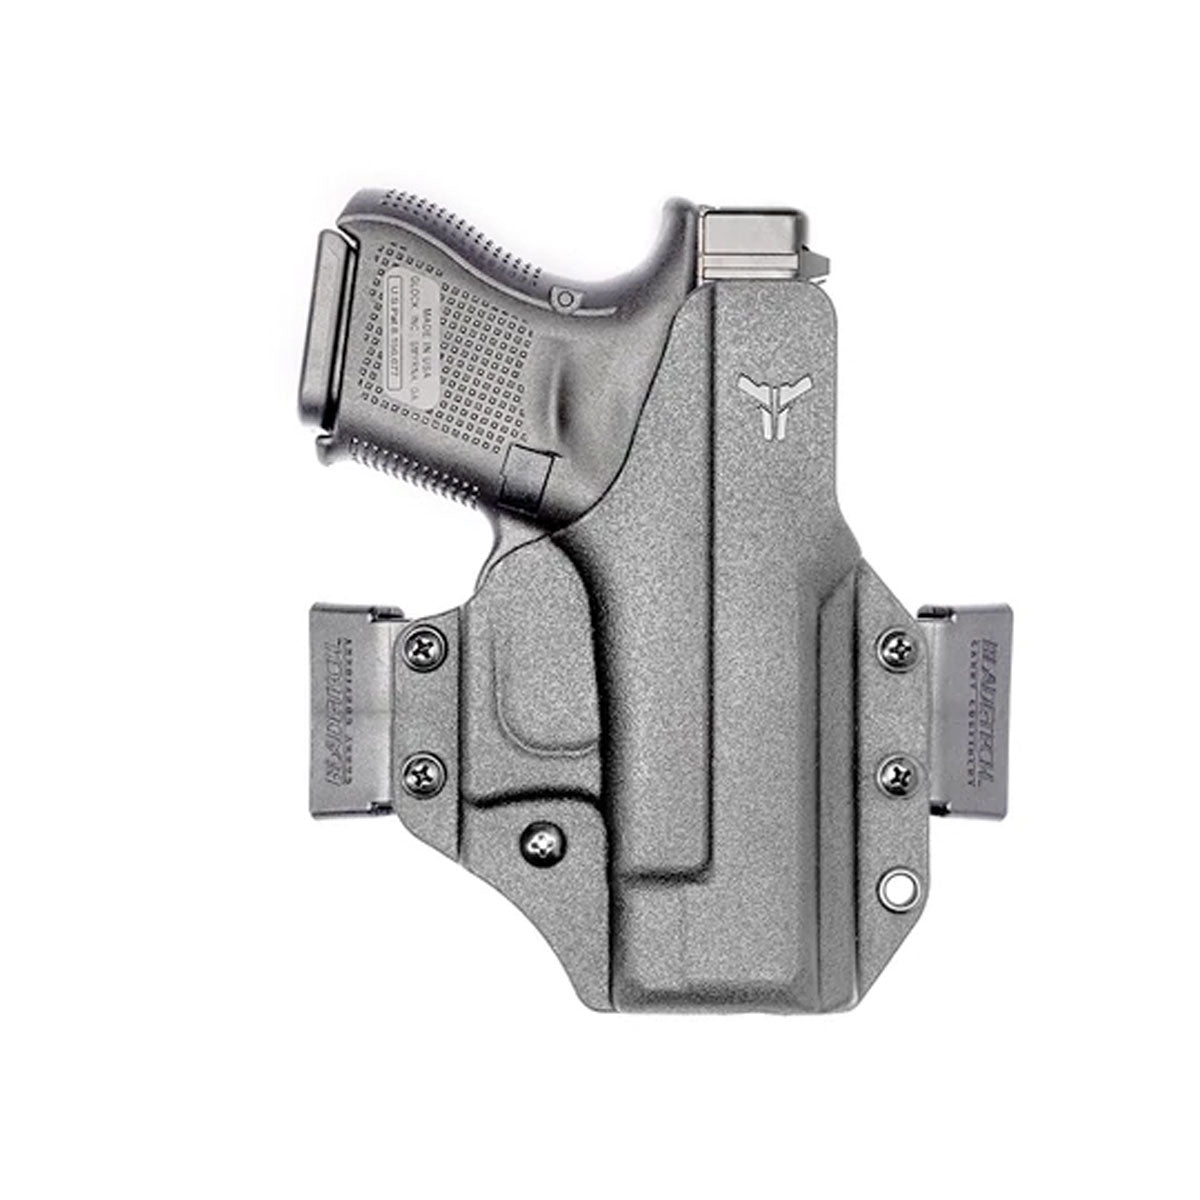 Blade-Tech Total Eclipse OWB Holster Holsters Blade-Tech Holsters Glock 26/27 Tactical Gear Supplier Tactical Distributors Australia